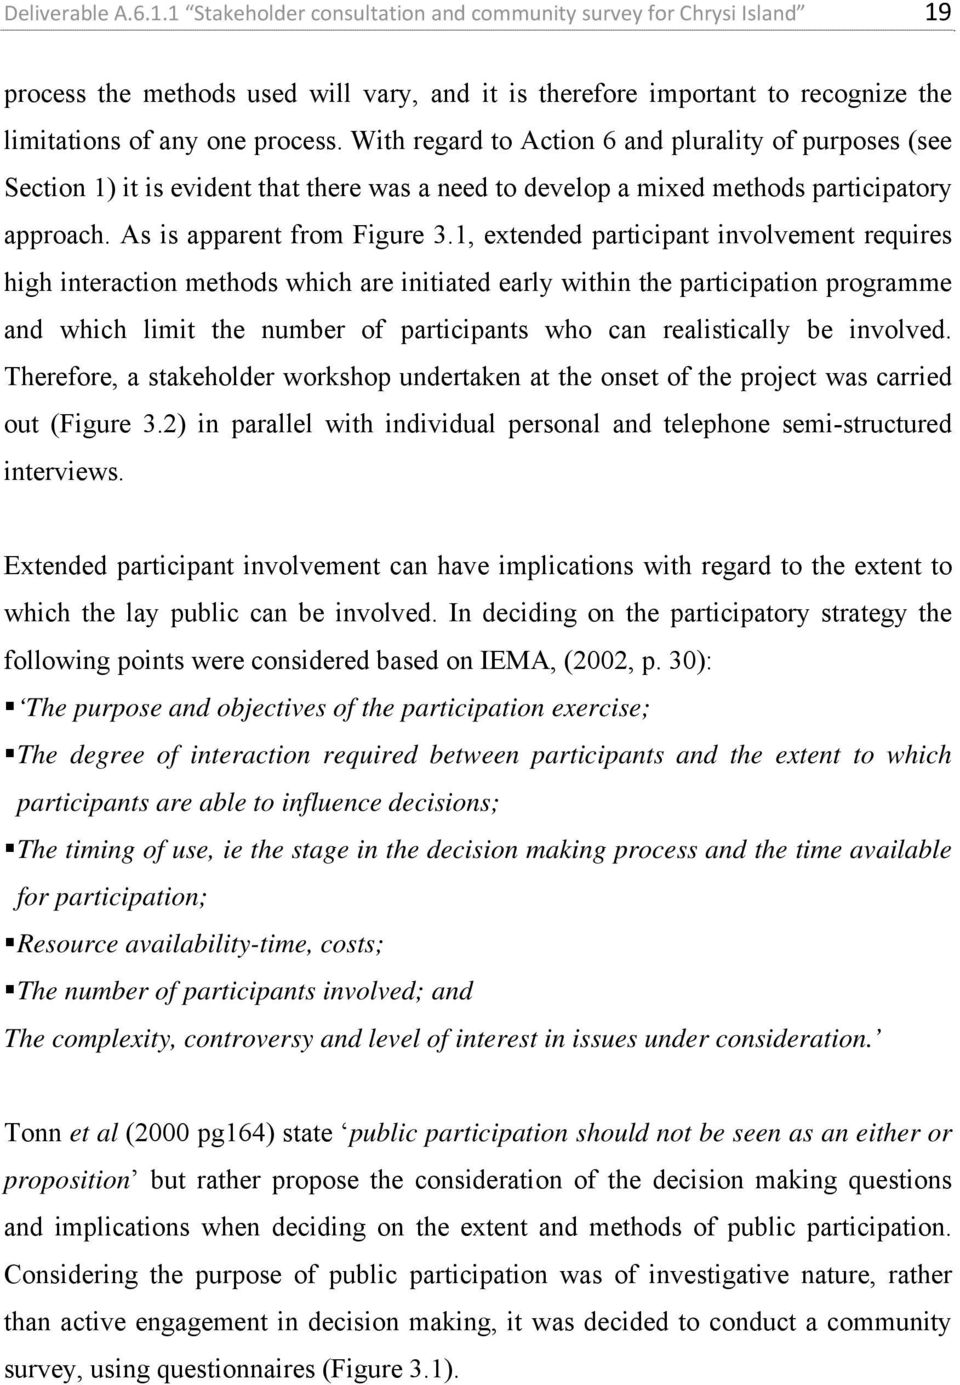 With regard to Action 6 and plurality of purposes (see Section 1) it is evident that there was a need to develop a mixed methods participatory approach. As is apparent from Figure 3.